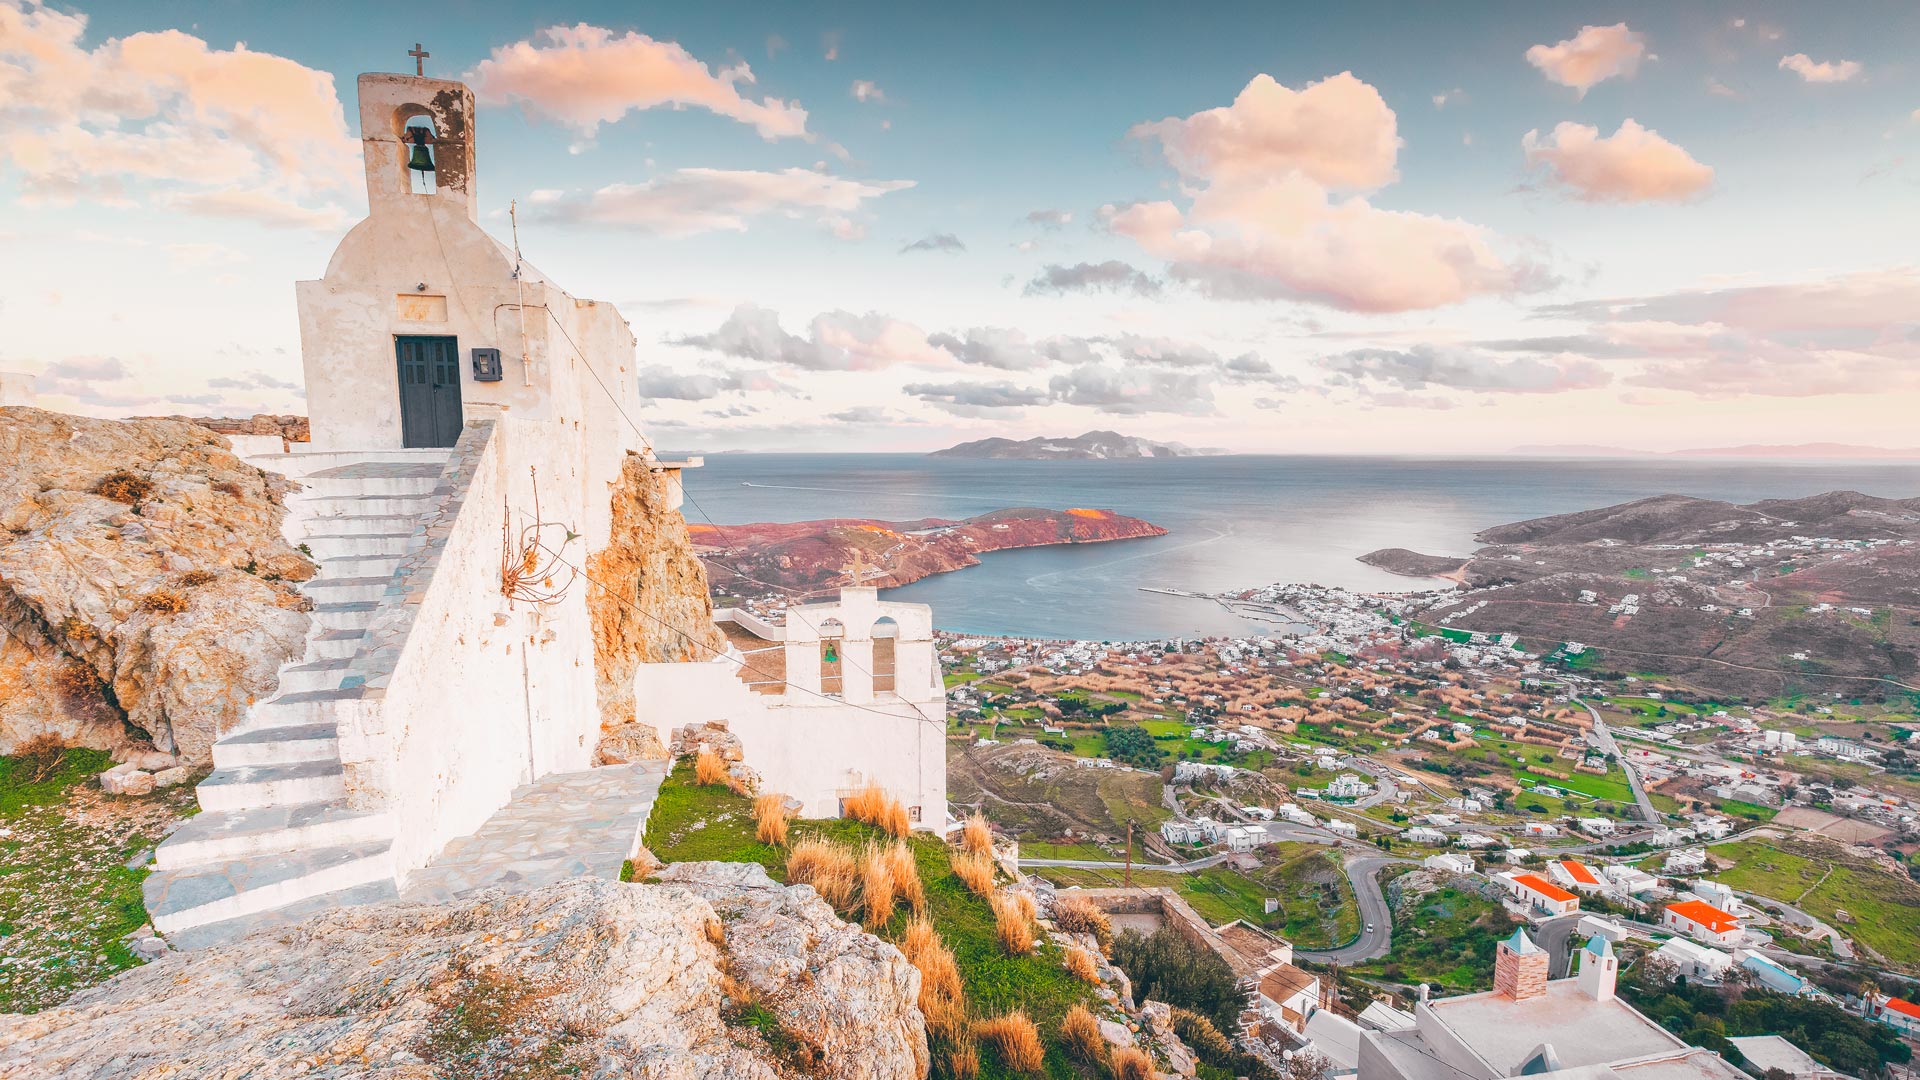 From the beautiful chapel of Agios Konstantinos nearby, you can look out beyond Livadi onto a who’s who of Cycladic islands